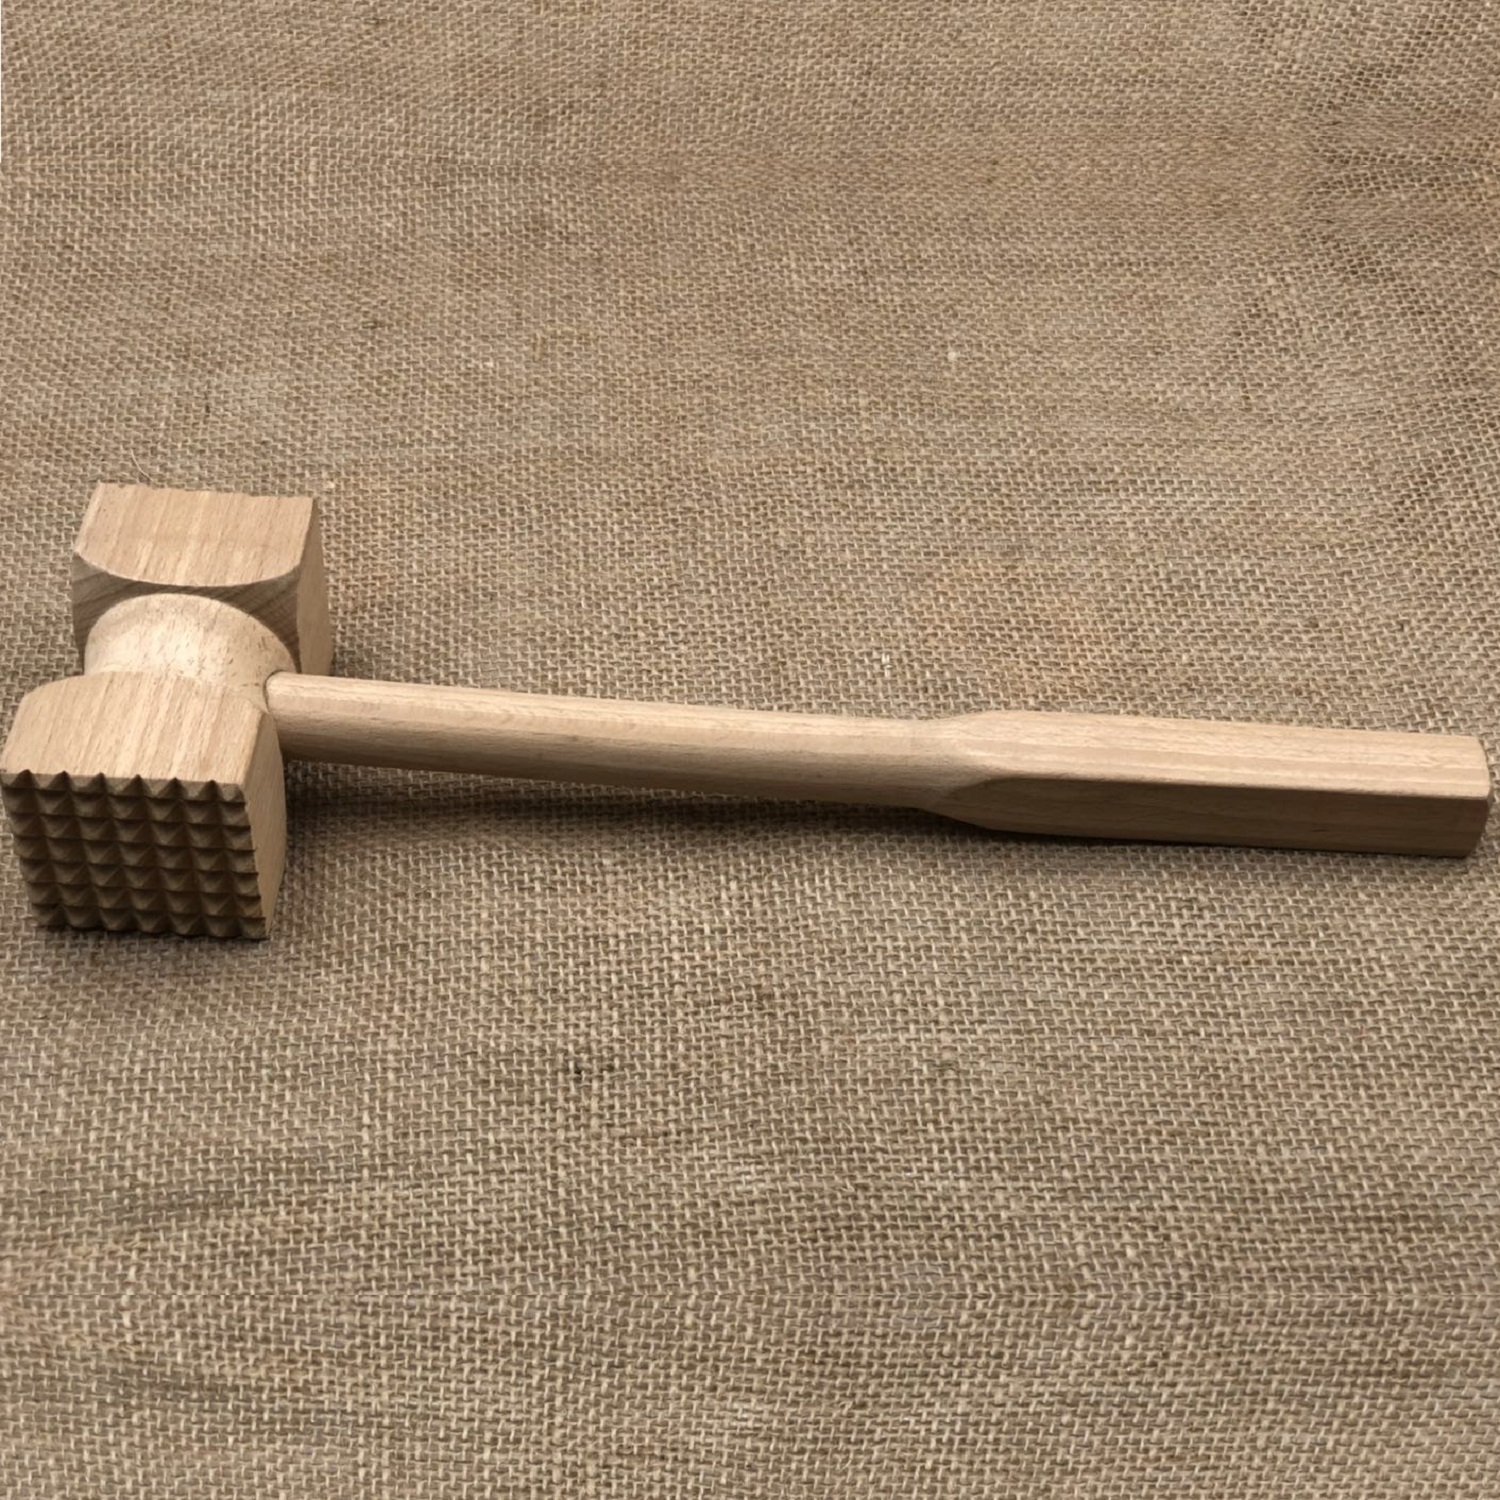 Wooden Meat Tenderizer,Made of Beech Wood